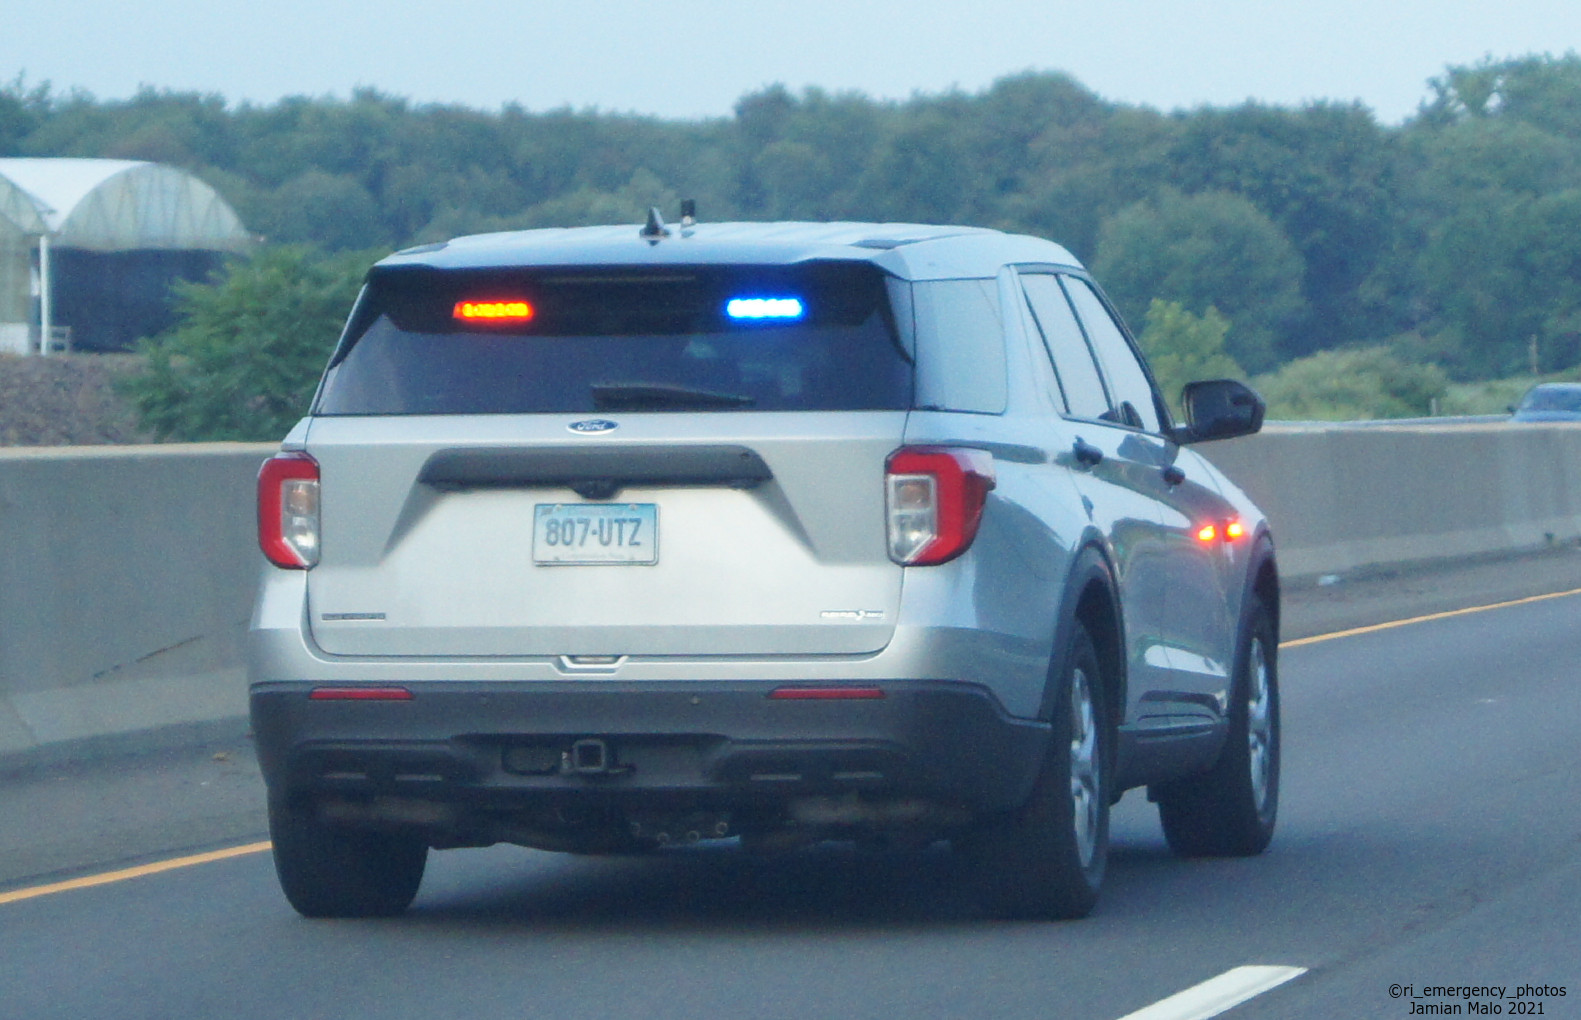 A photo  of Connecticut State Police
            Cruiser 807, a 2020-2021 Ford Police Interceptor Utility             taken by Jamian Malo